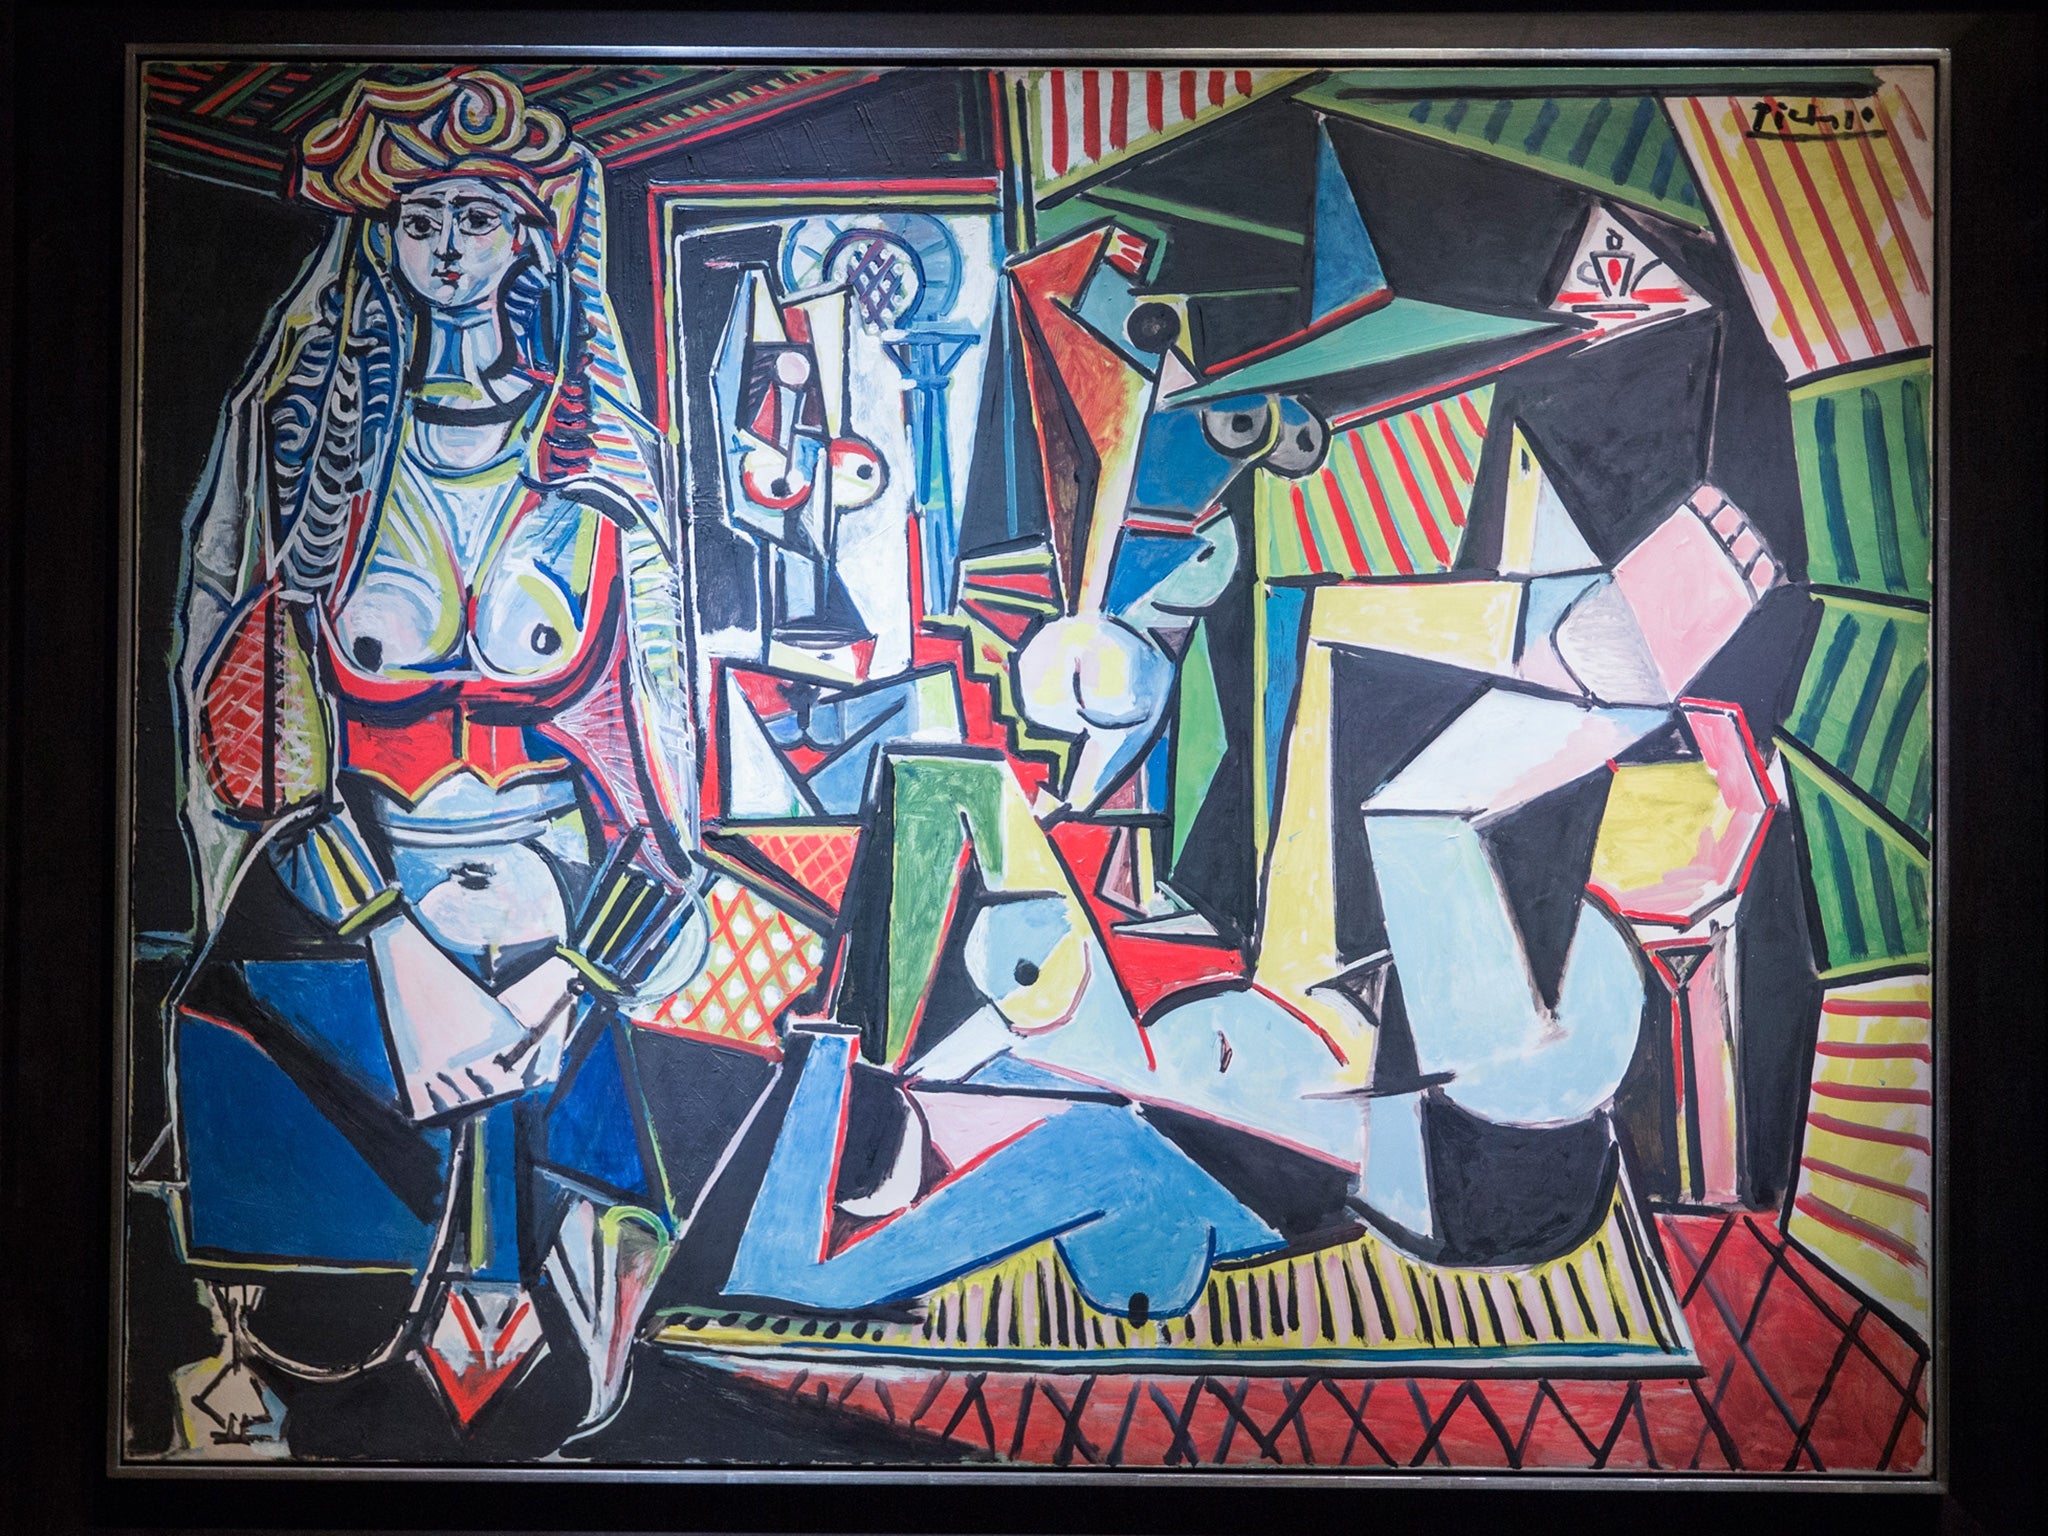 Women of Algiers (Version O) is a fine painting, but no finer than many others by Picasso